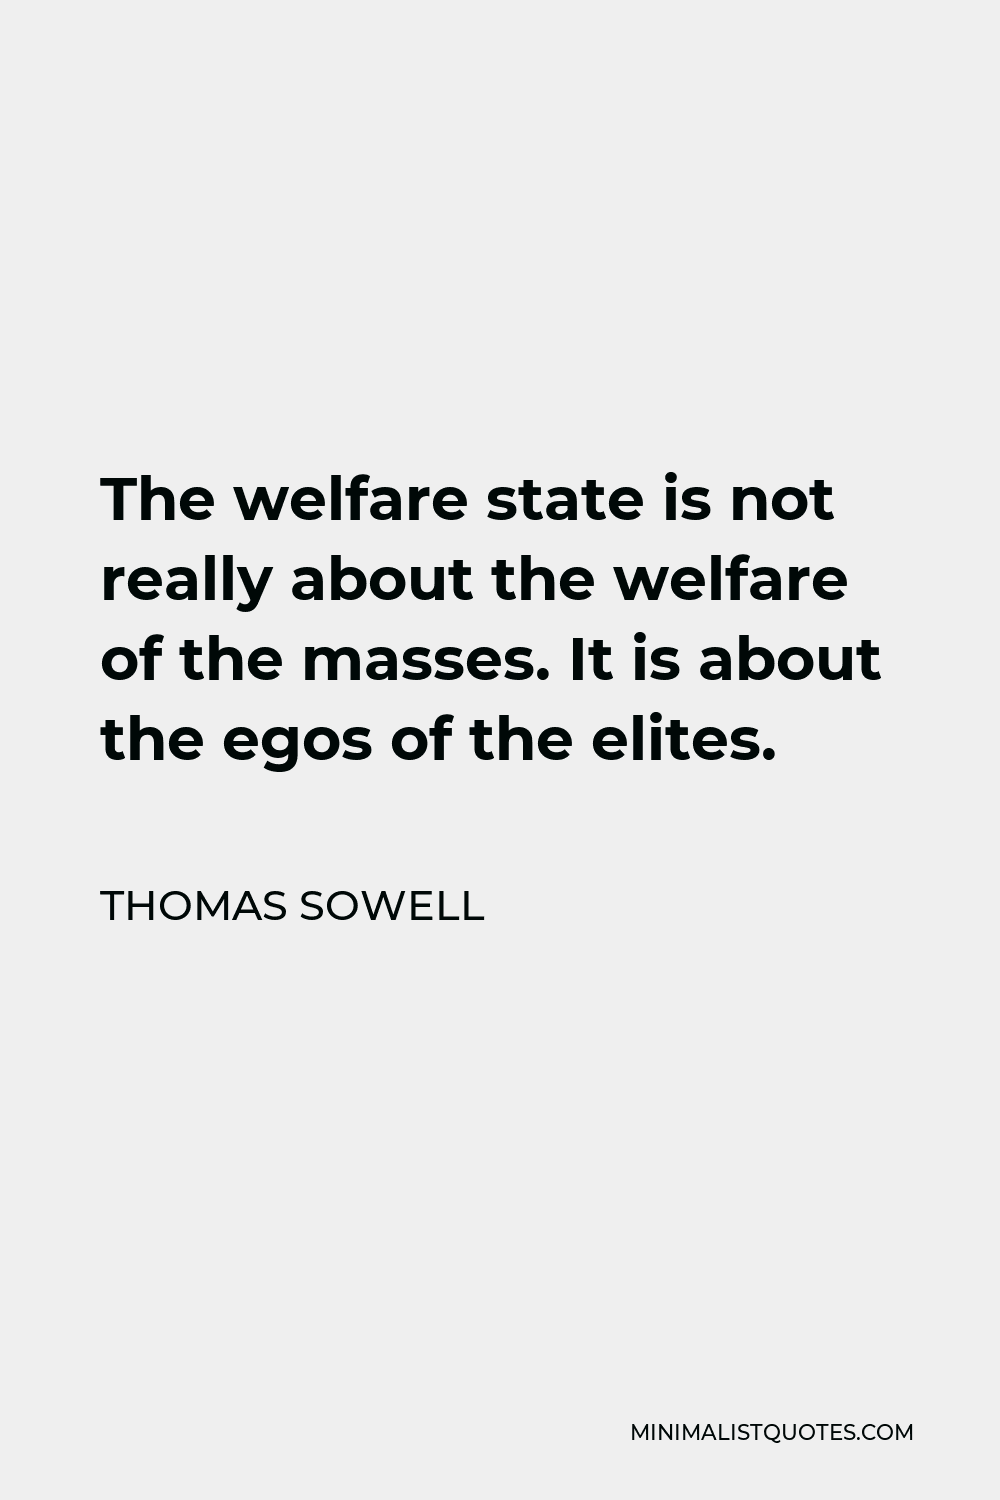 Thomas Sowell Quote - The welfare state is not really about the welfare of the masses. It is about the egos of the elites.